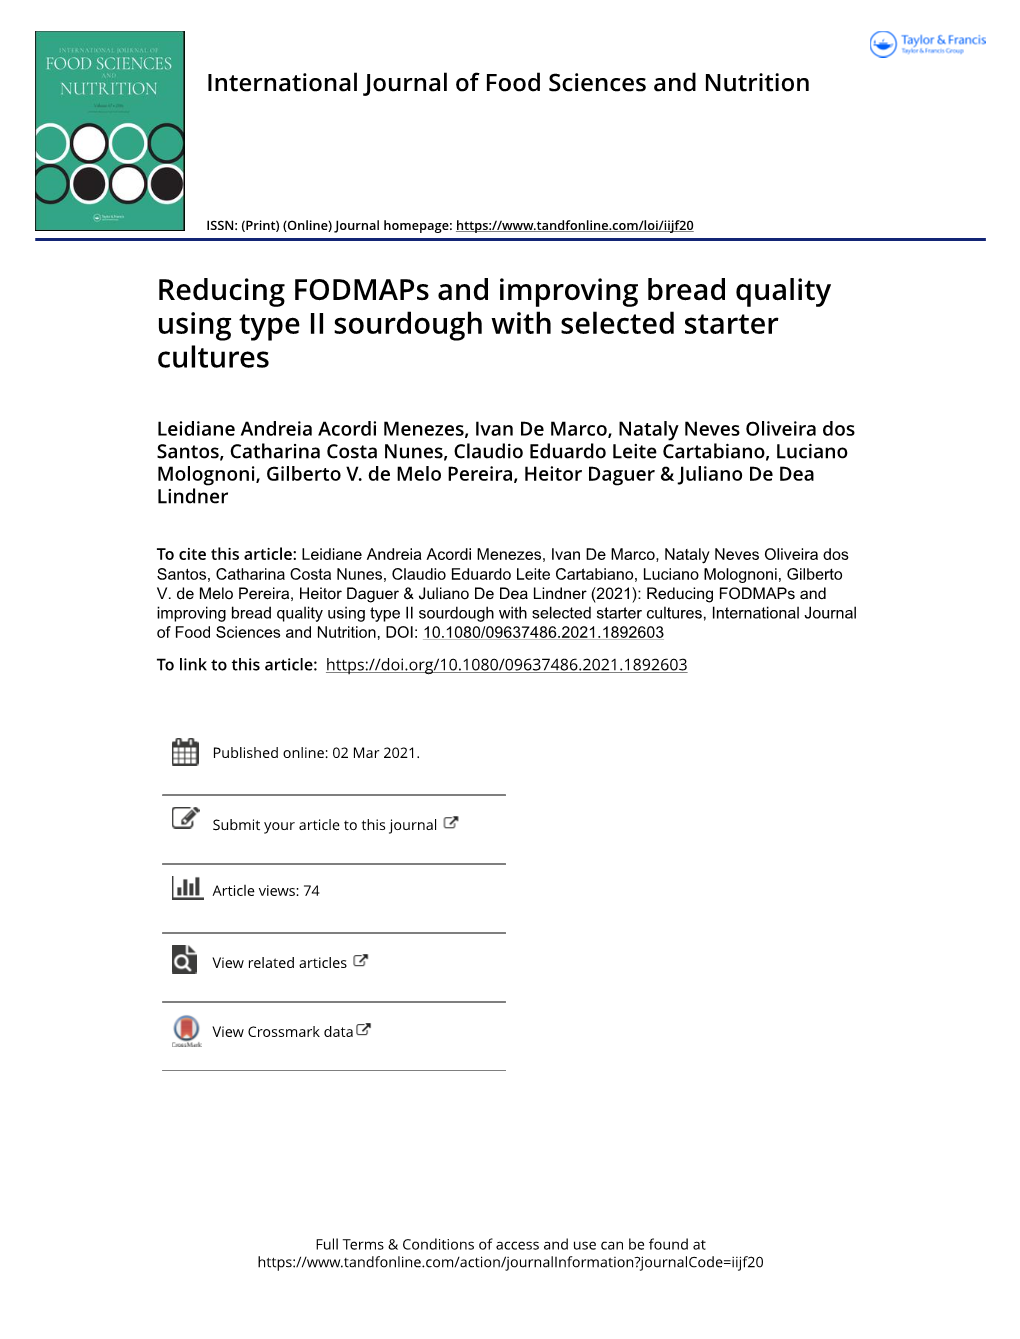 Reducing Fodmaps and Improving Bread Quality Using Type II Sourdough with Selected Starter Cultures